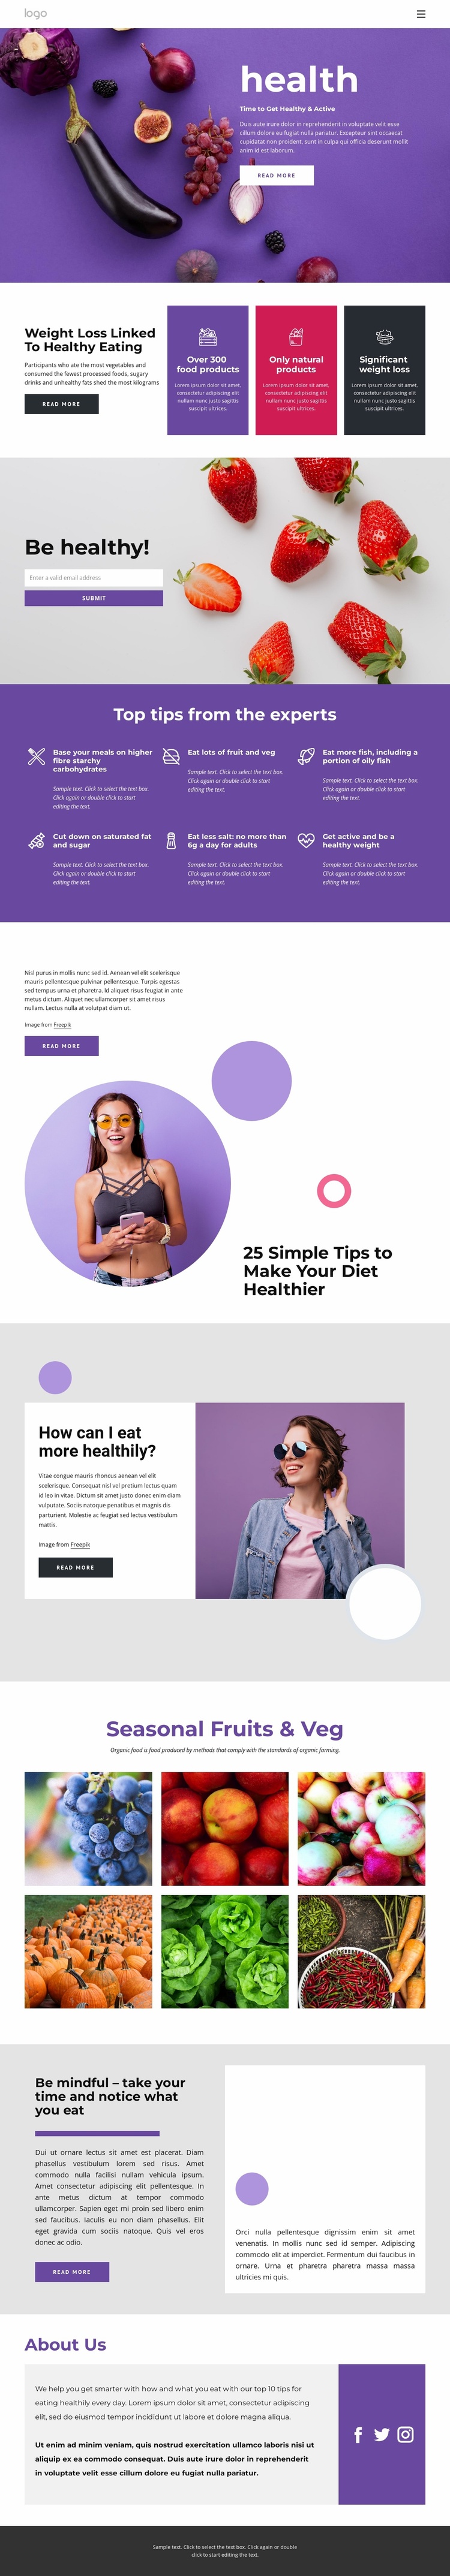 Building a healthy and balanced diet Website Template